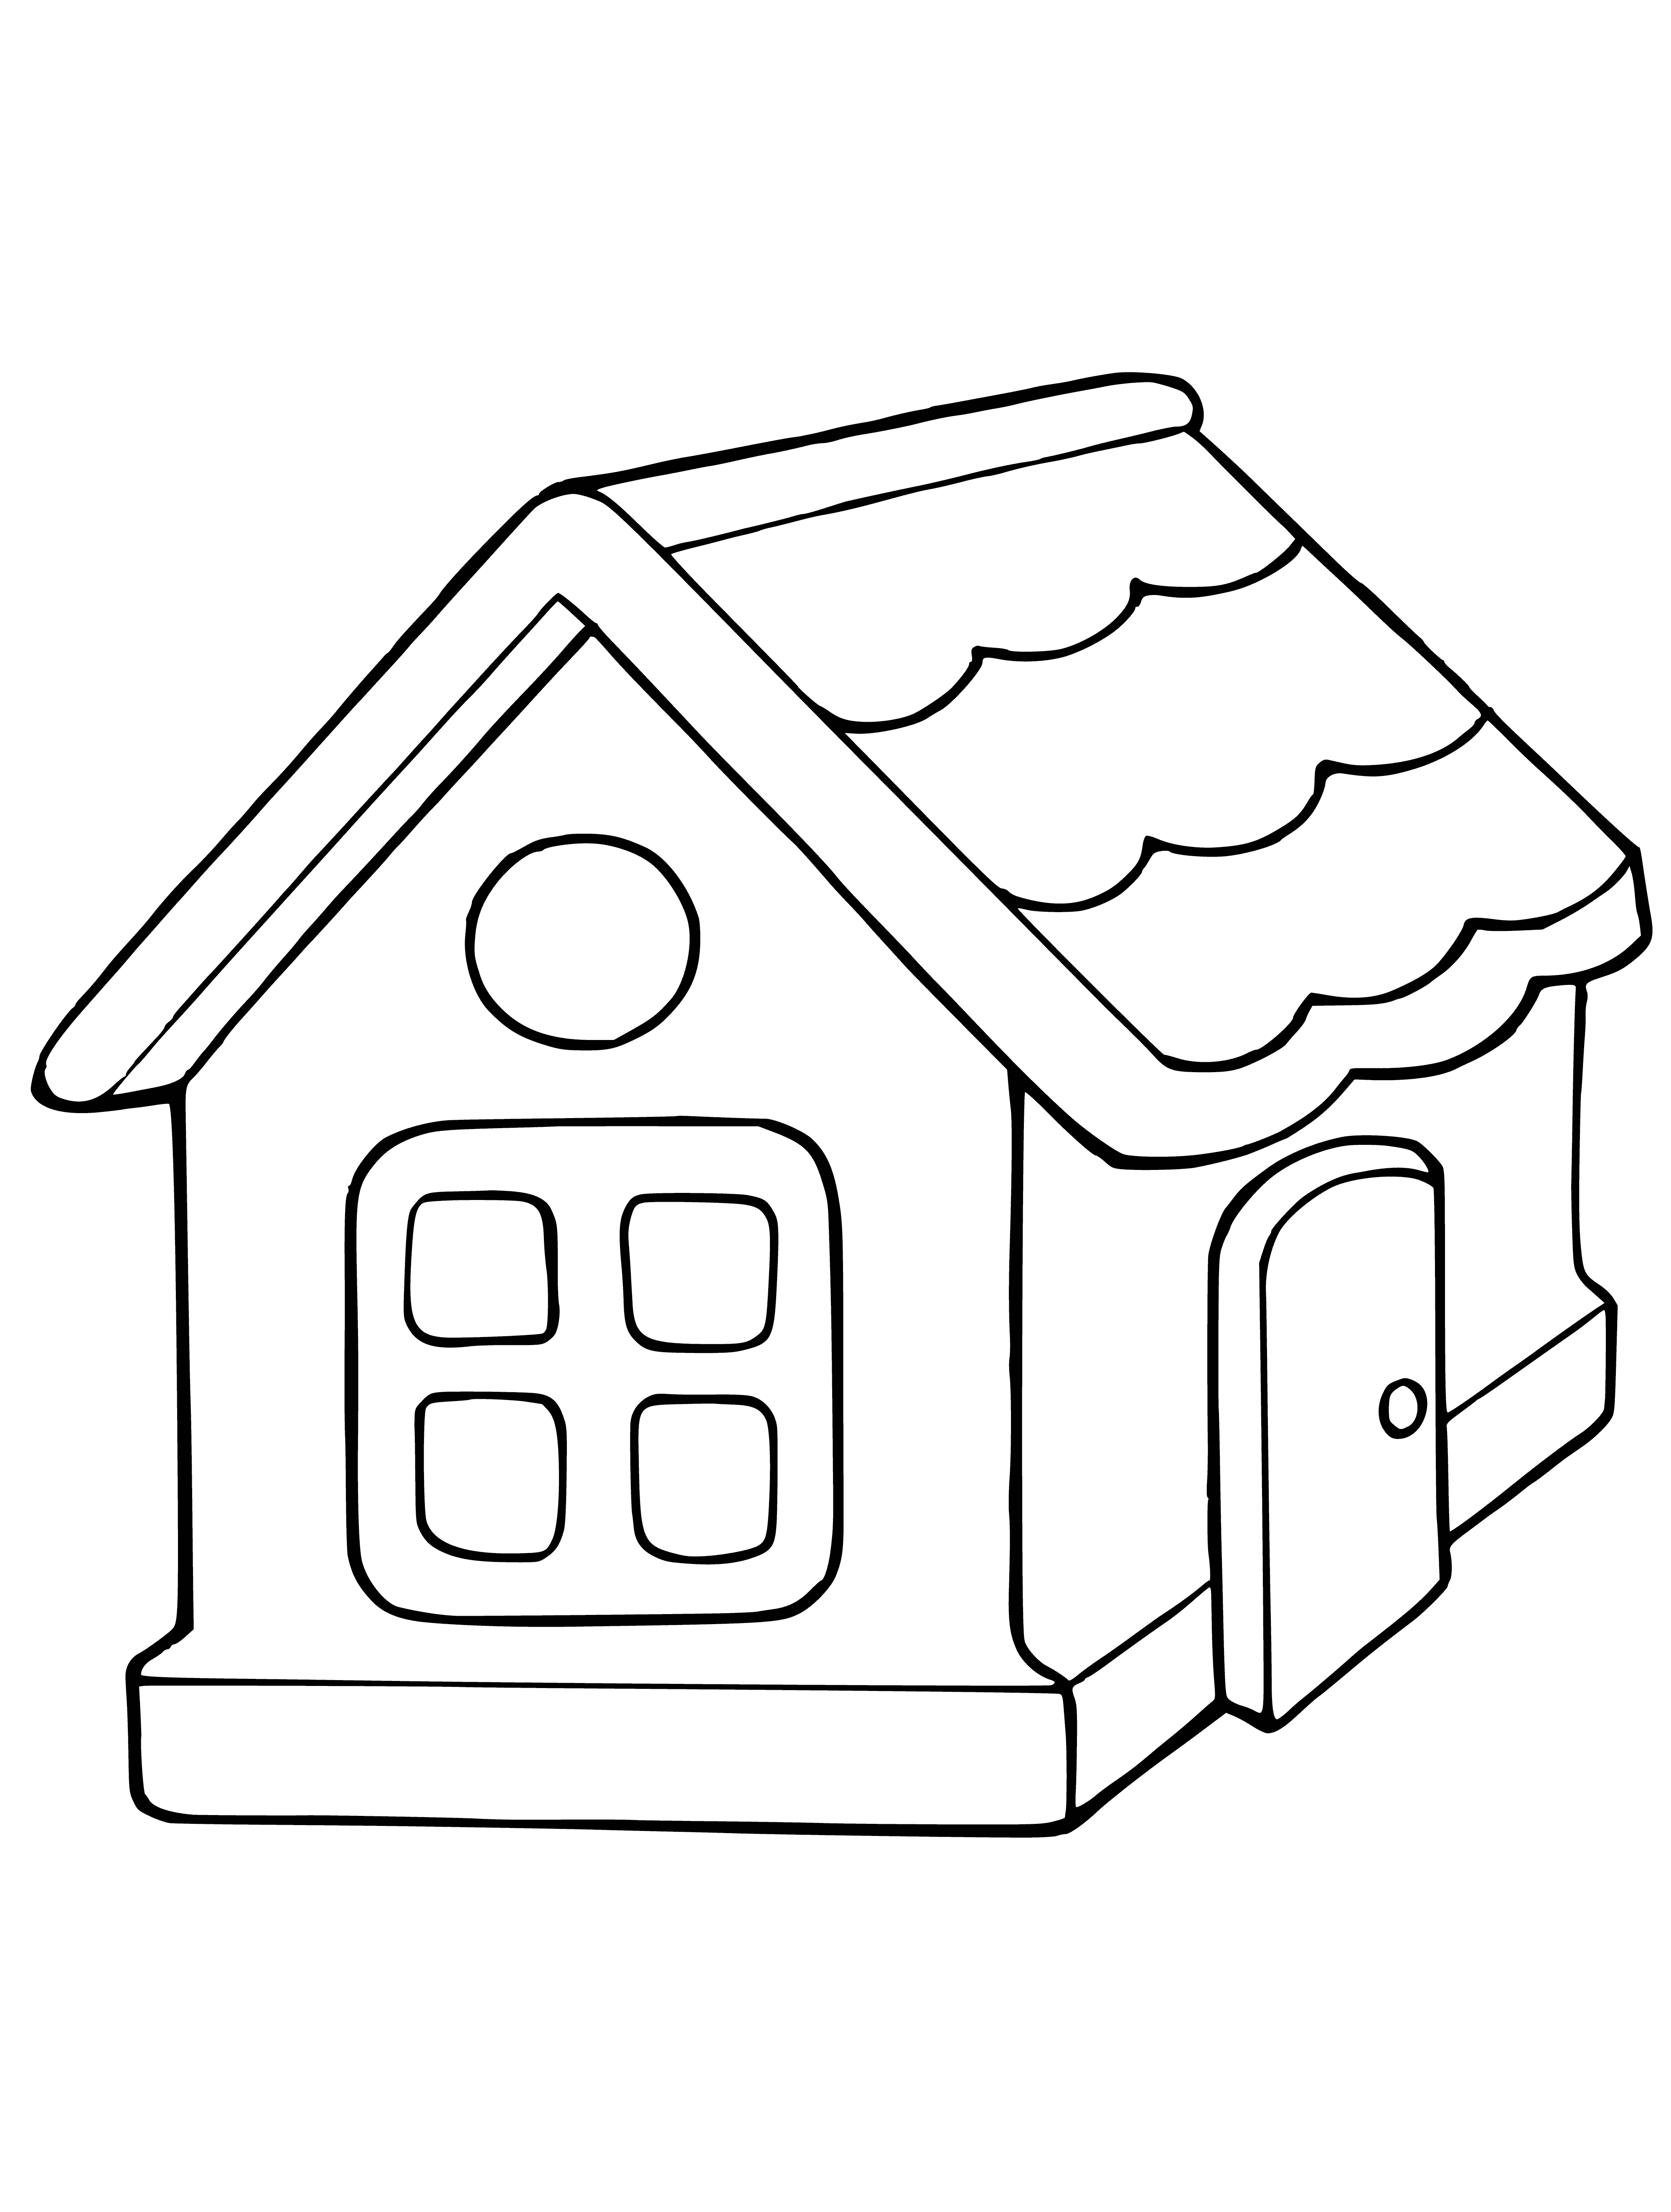 Toy house coloring page